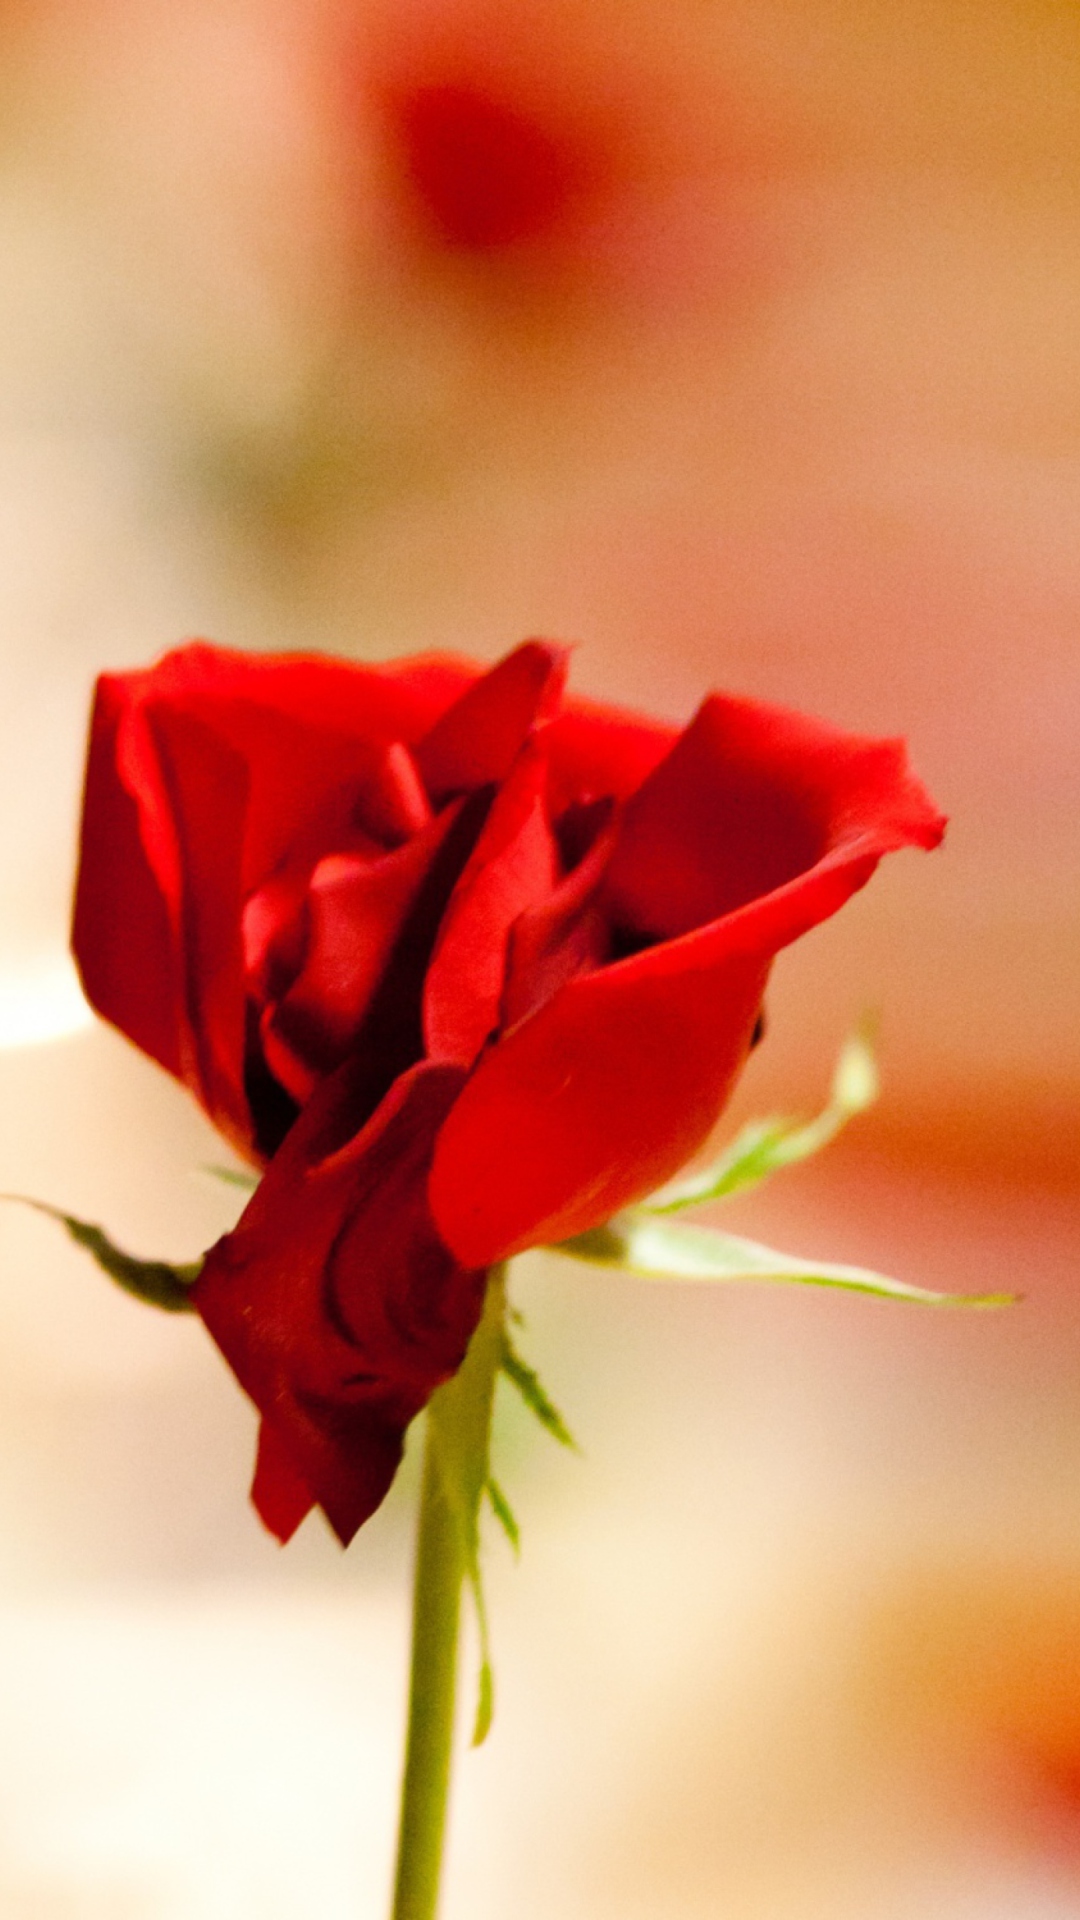 One Red Rose For You wallpaper 1080x1920